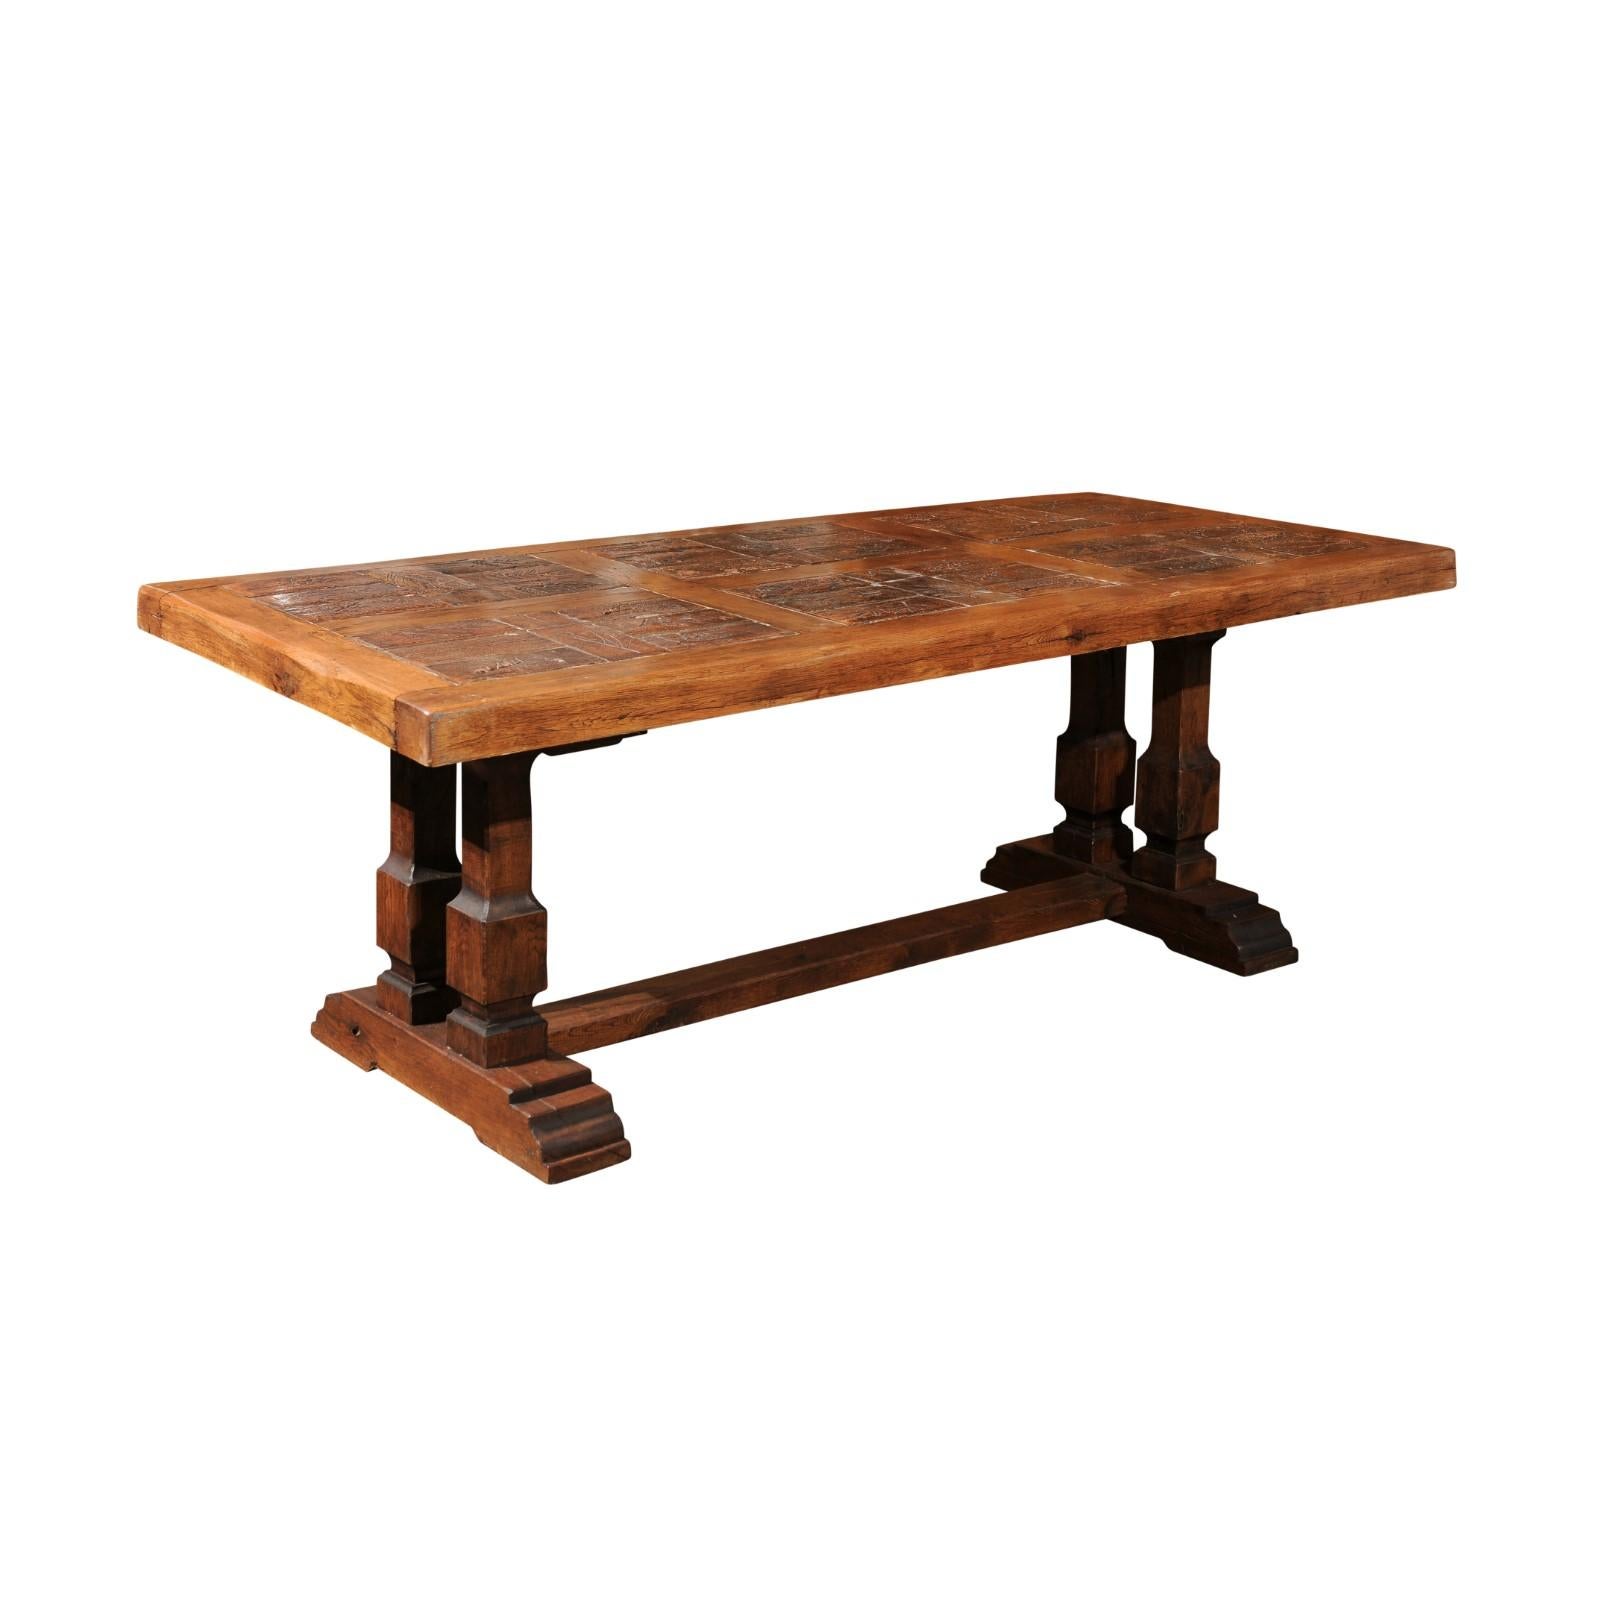 A Southern French Brutalist solid oak dining room trestle table with hand-made terracotta bricks inset top. This Southern French Brutalist solid oak dining room trestle table from the mid-20th century stands as a testament to unique design and